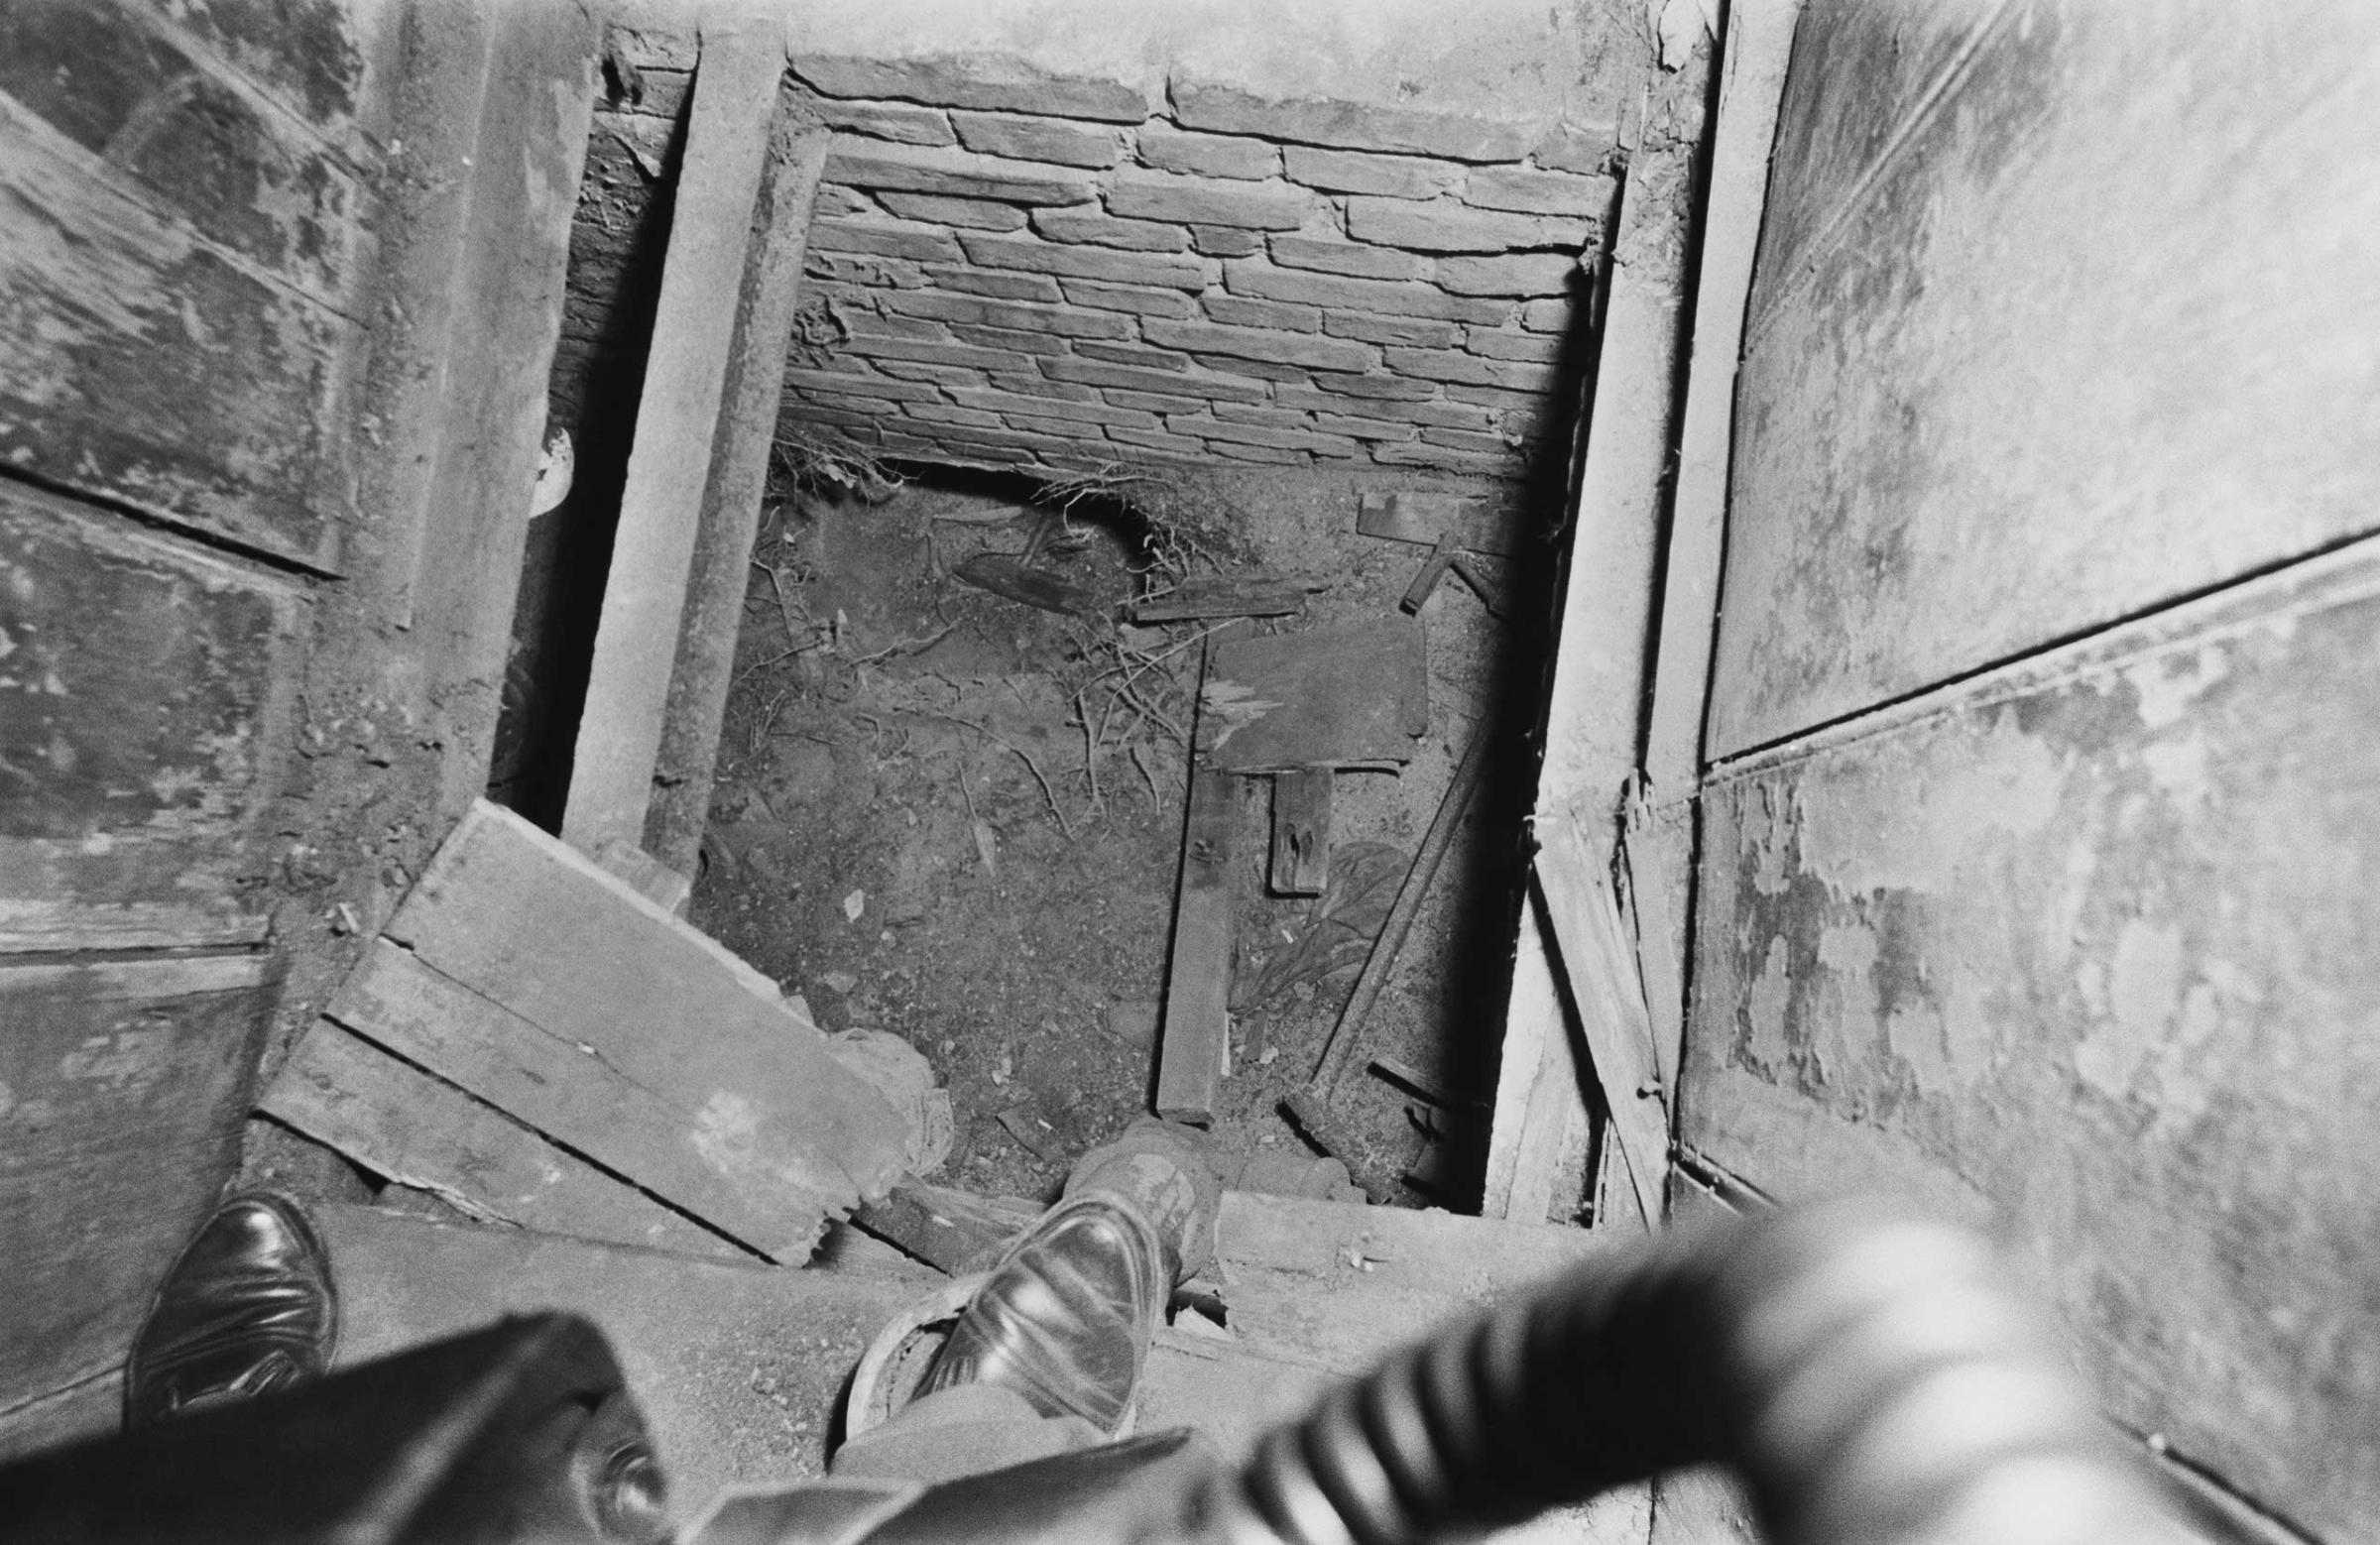 Arwed Messmer, using a negative, call number BStU MfS AU 8795/65 Bd. 4 Film 83 Neg. 60.View of the toilet in the yard at Strelitzer Straße 55 in Berlin-Mitte, where under the former cesspit there was an entrance to a tunnel through which 57 people escaped to West Berlin.